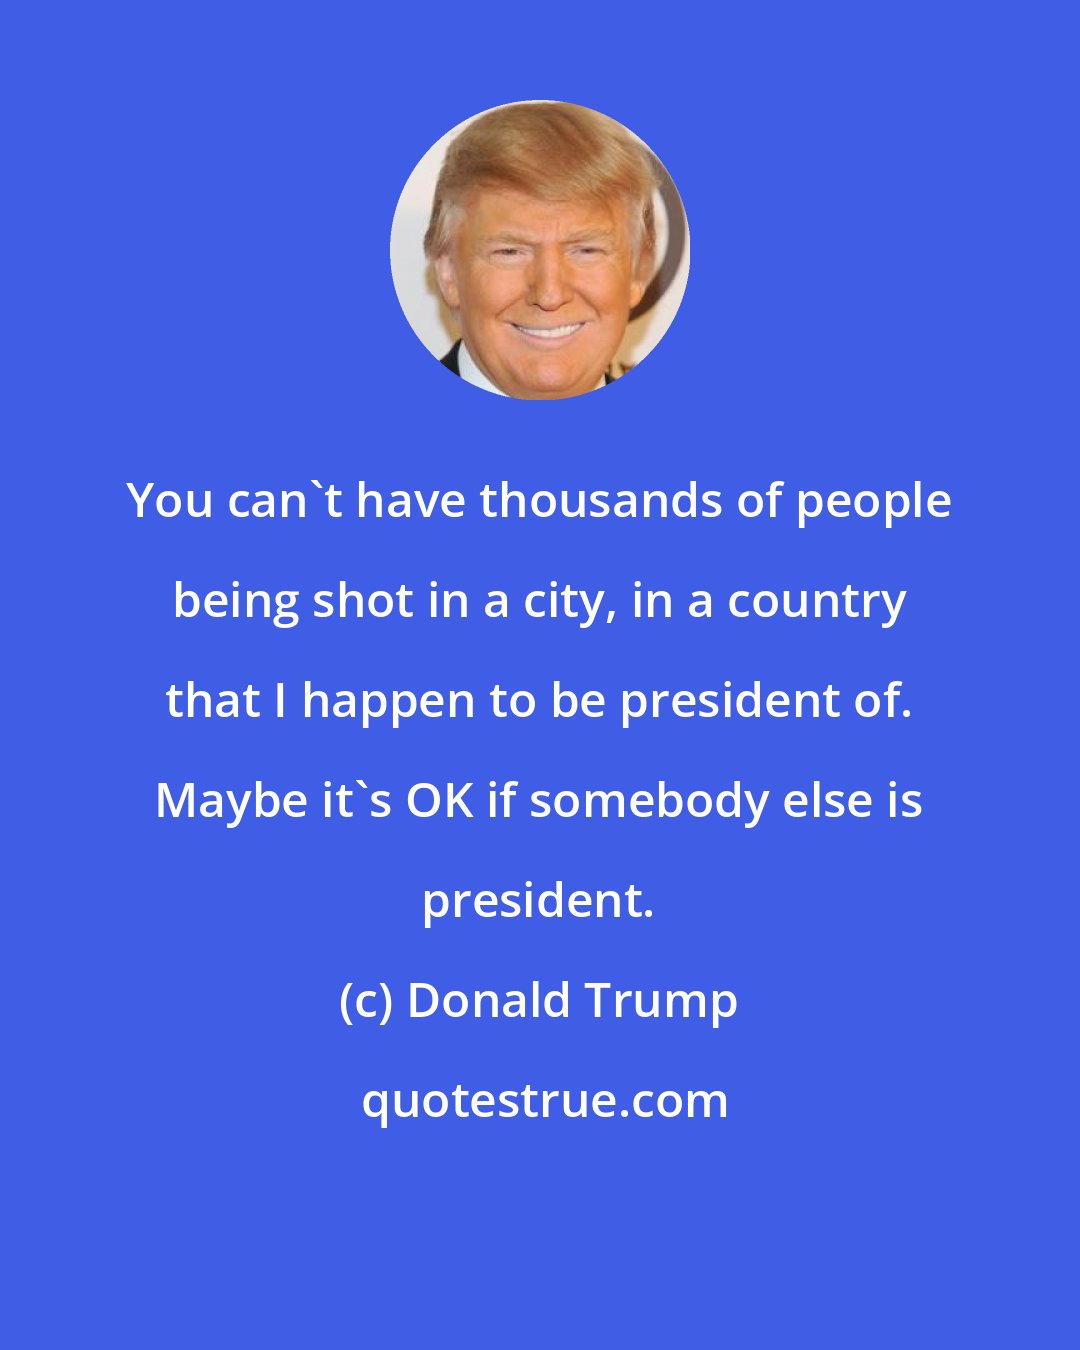 Donald Trump: You can't have thousands of people being shot in a city, in a country that I happen to be president of. Maybe it's OK if somebody else is president.